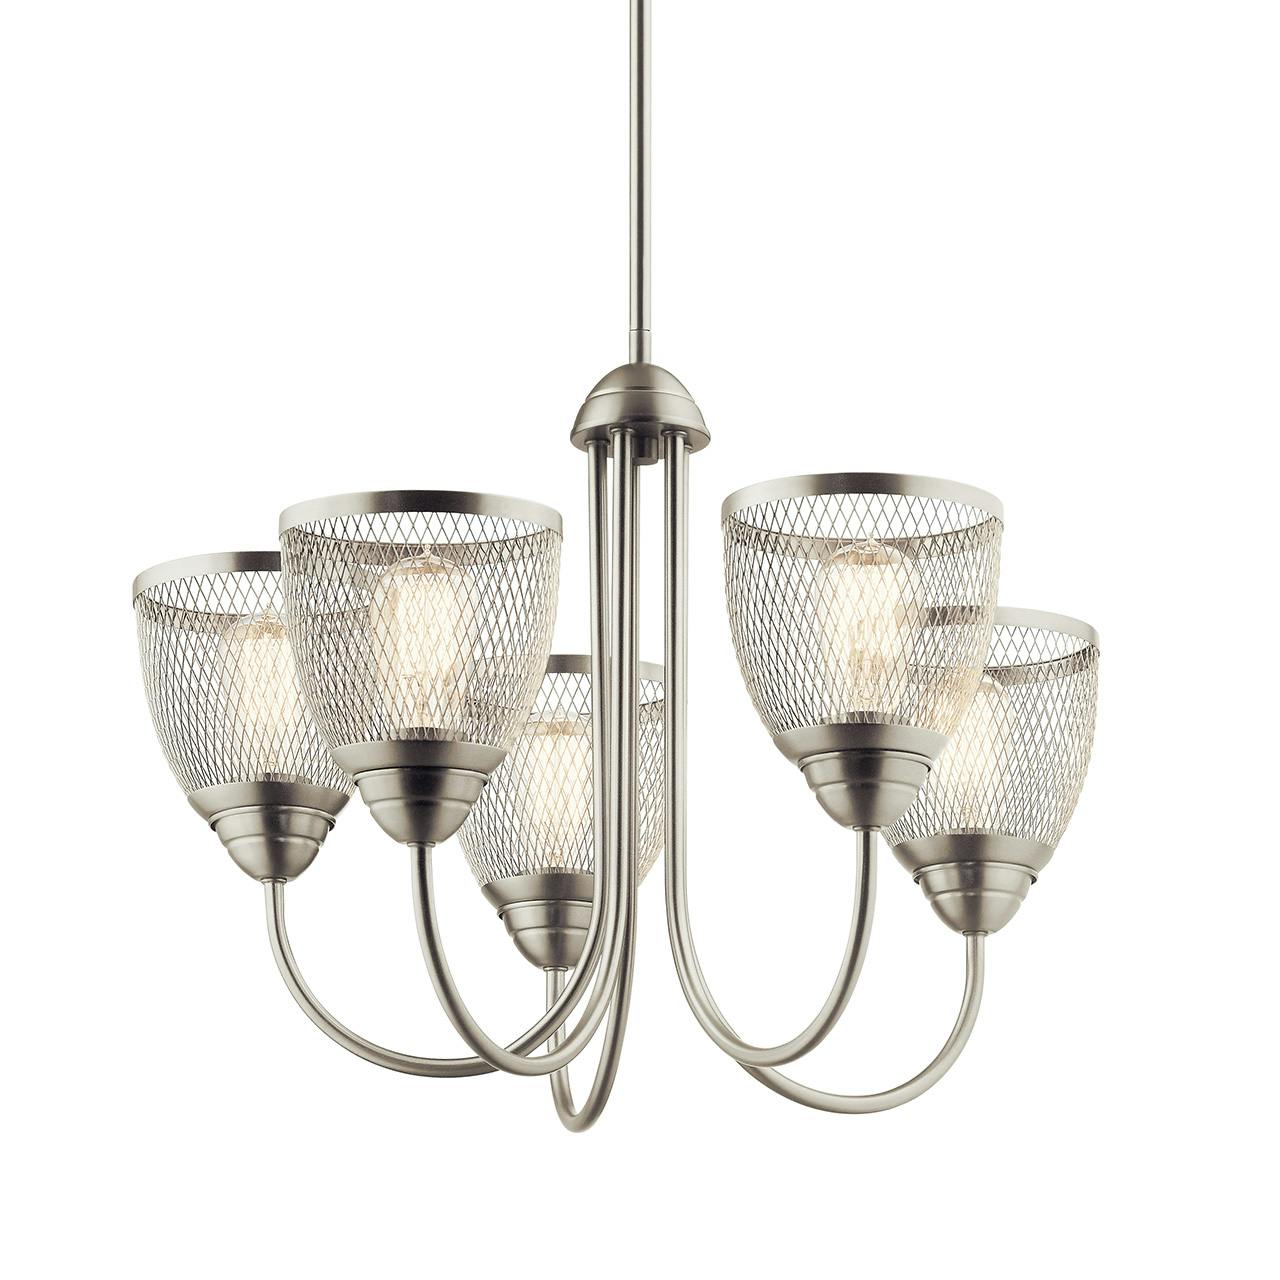 Voclain 17.5" 5 Light Chandelier Nickel without the canopy on a white background